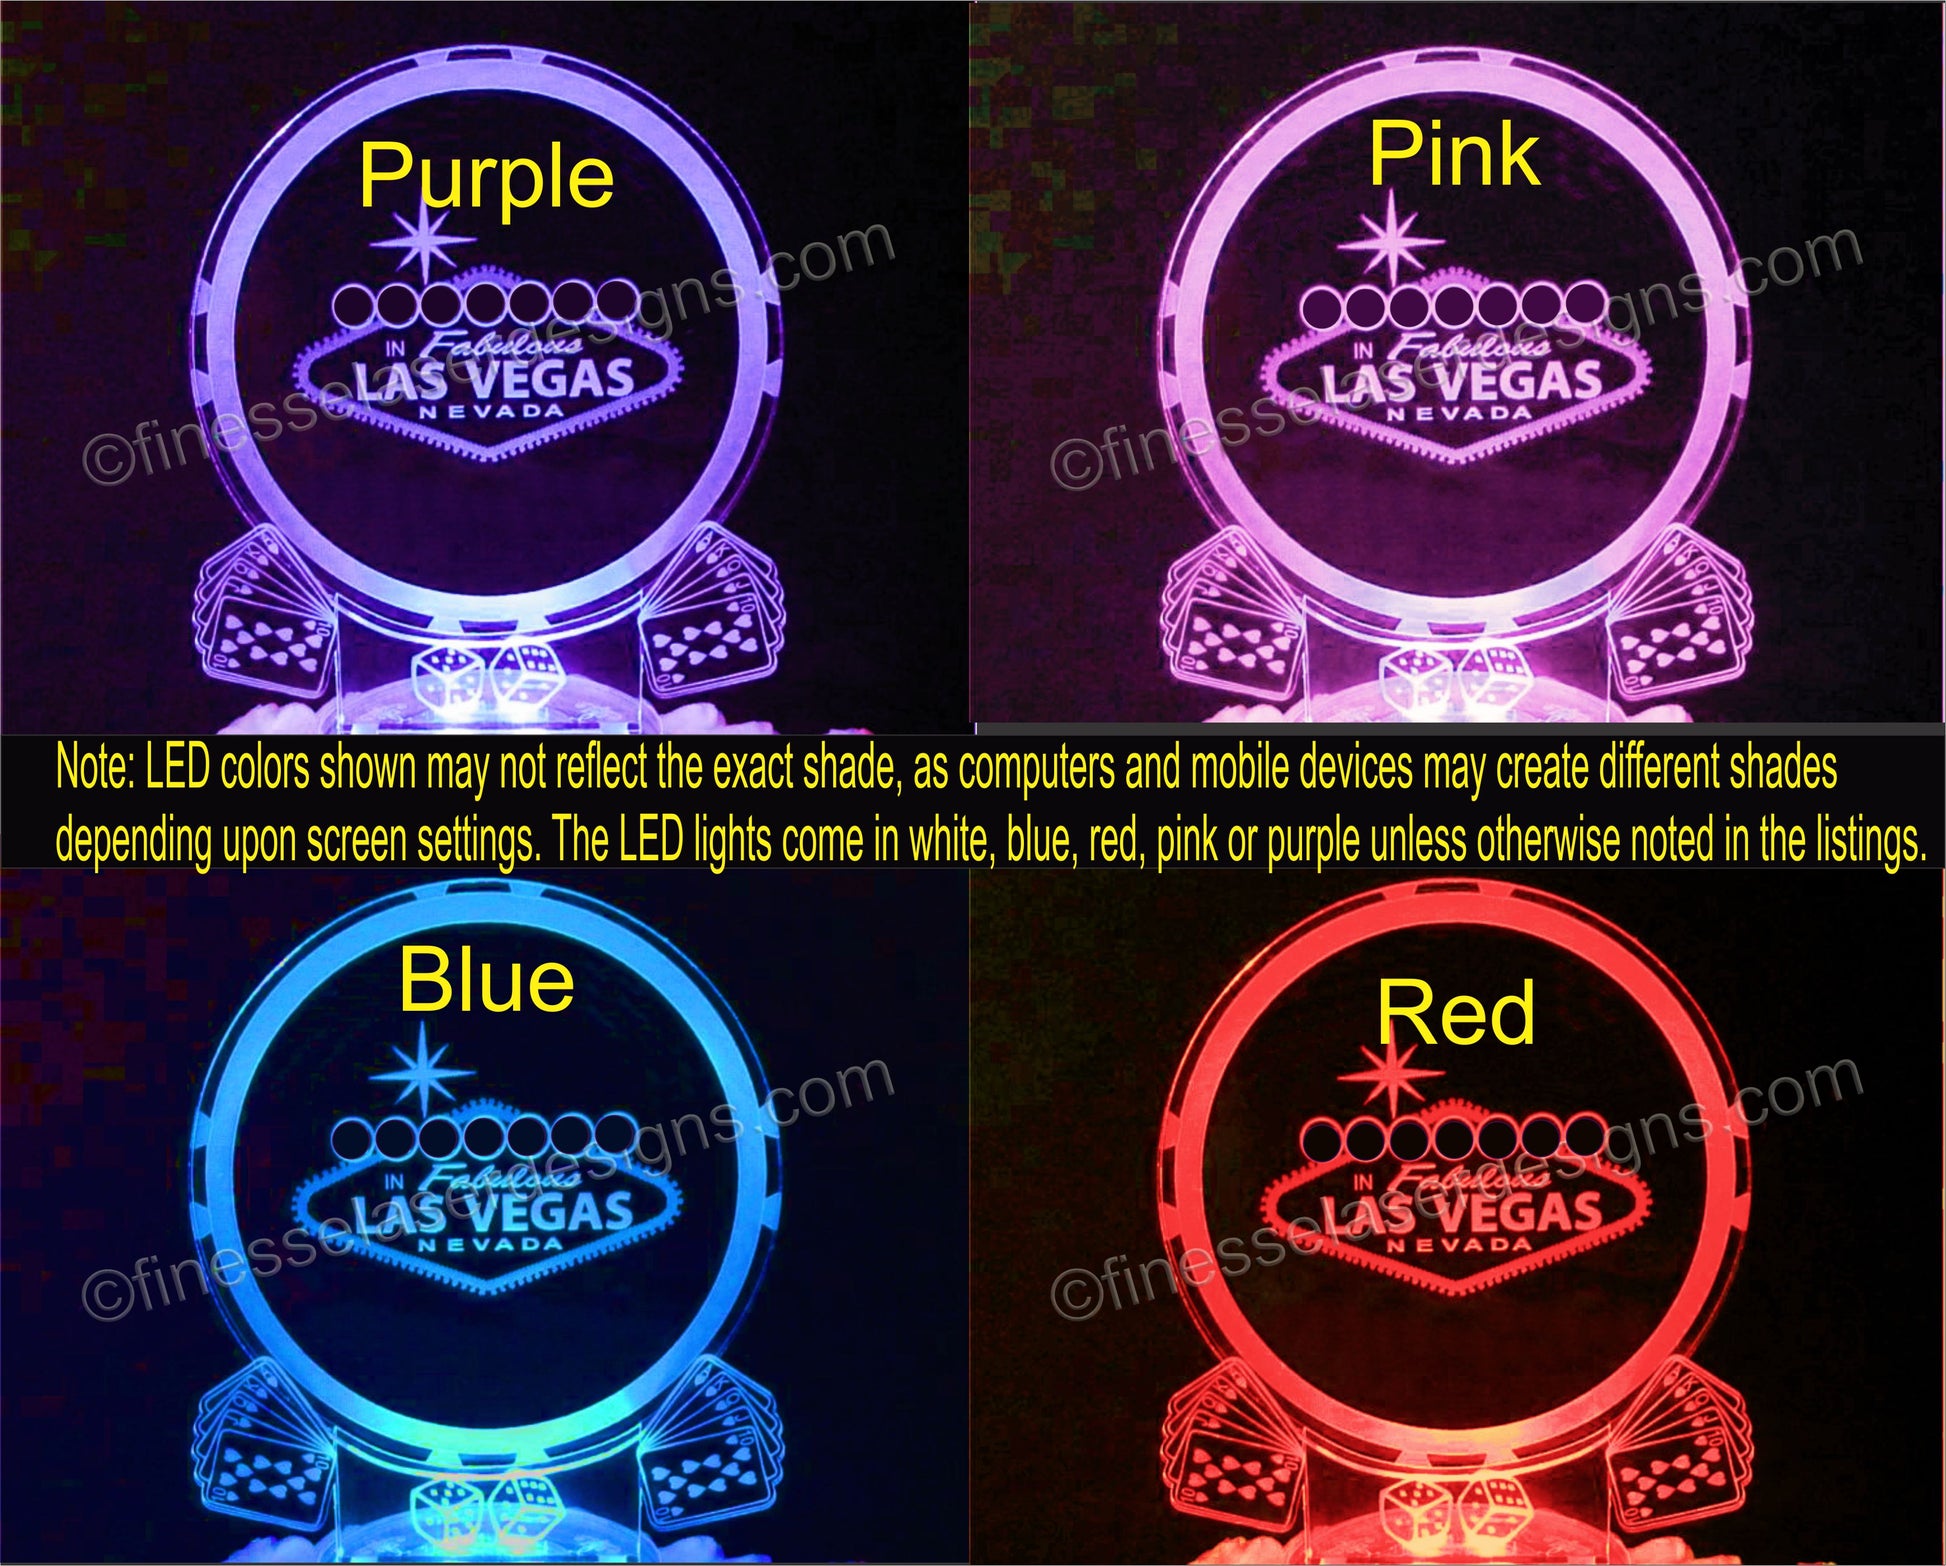 Lighted views of acrylic cake topper with Las Vegas sign design, shown in purple, pink, blue and red lights